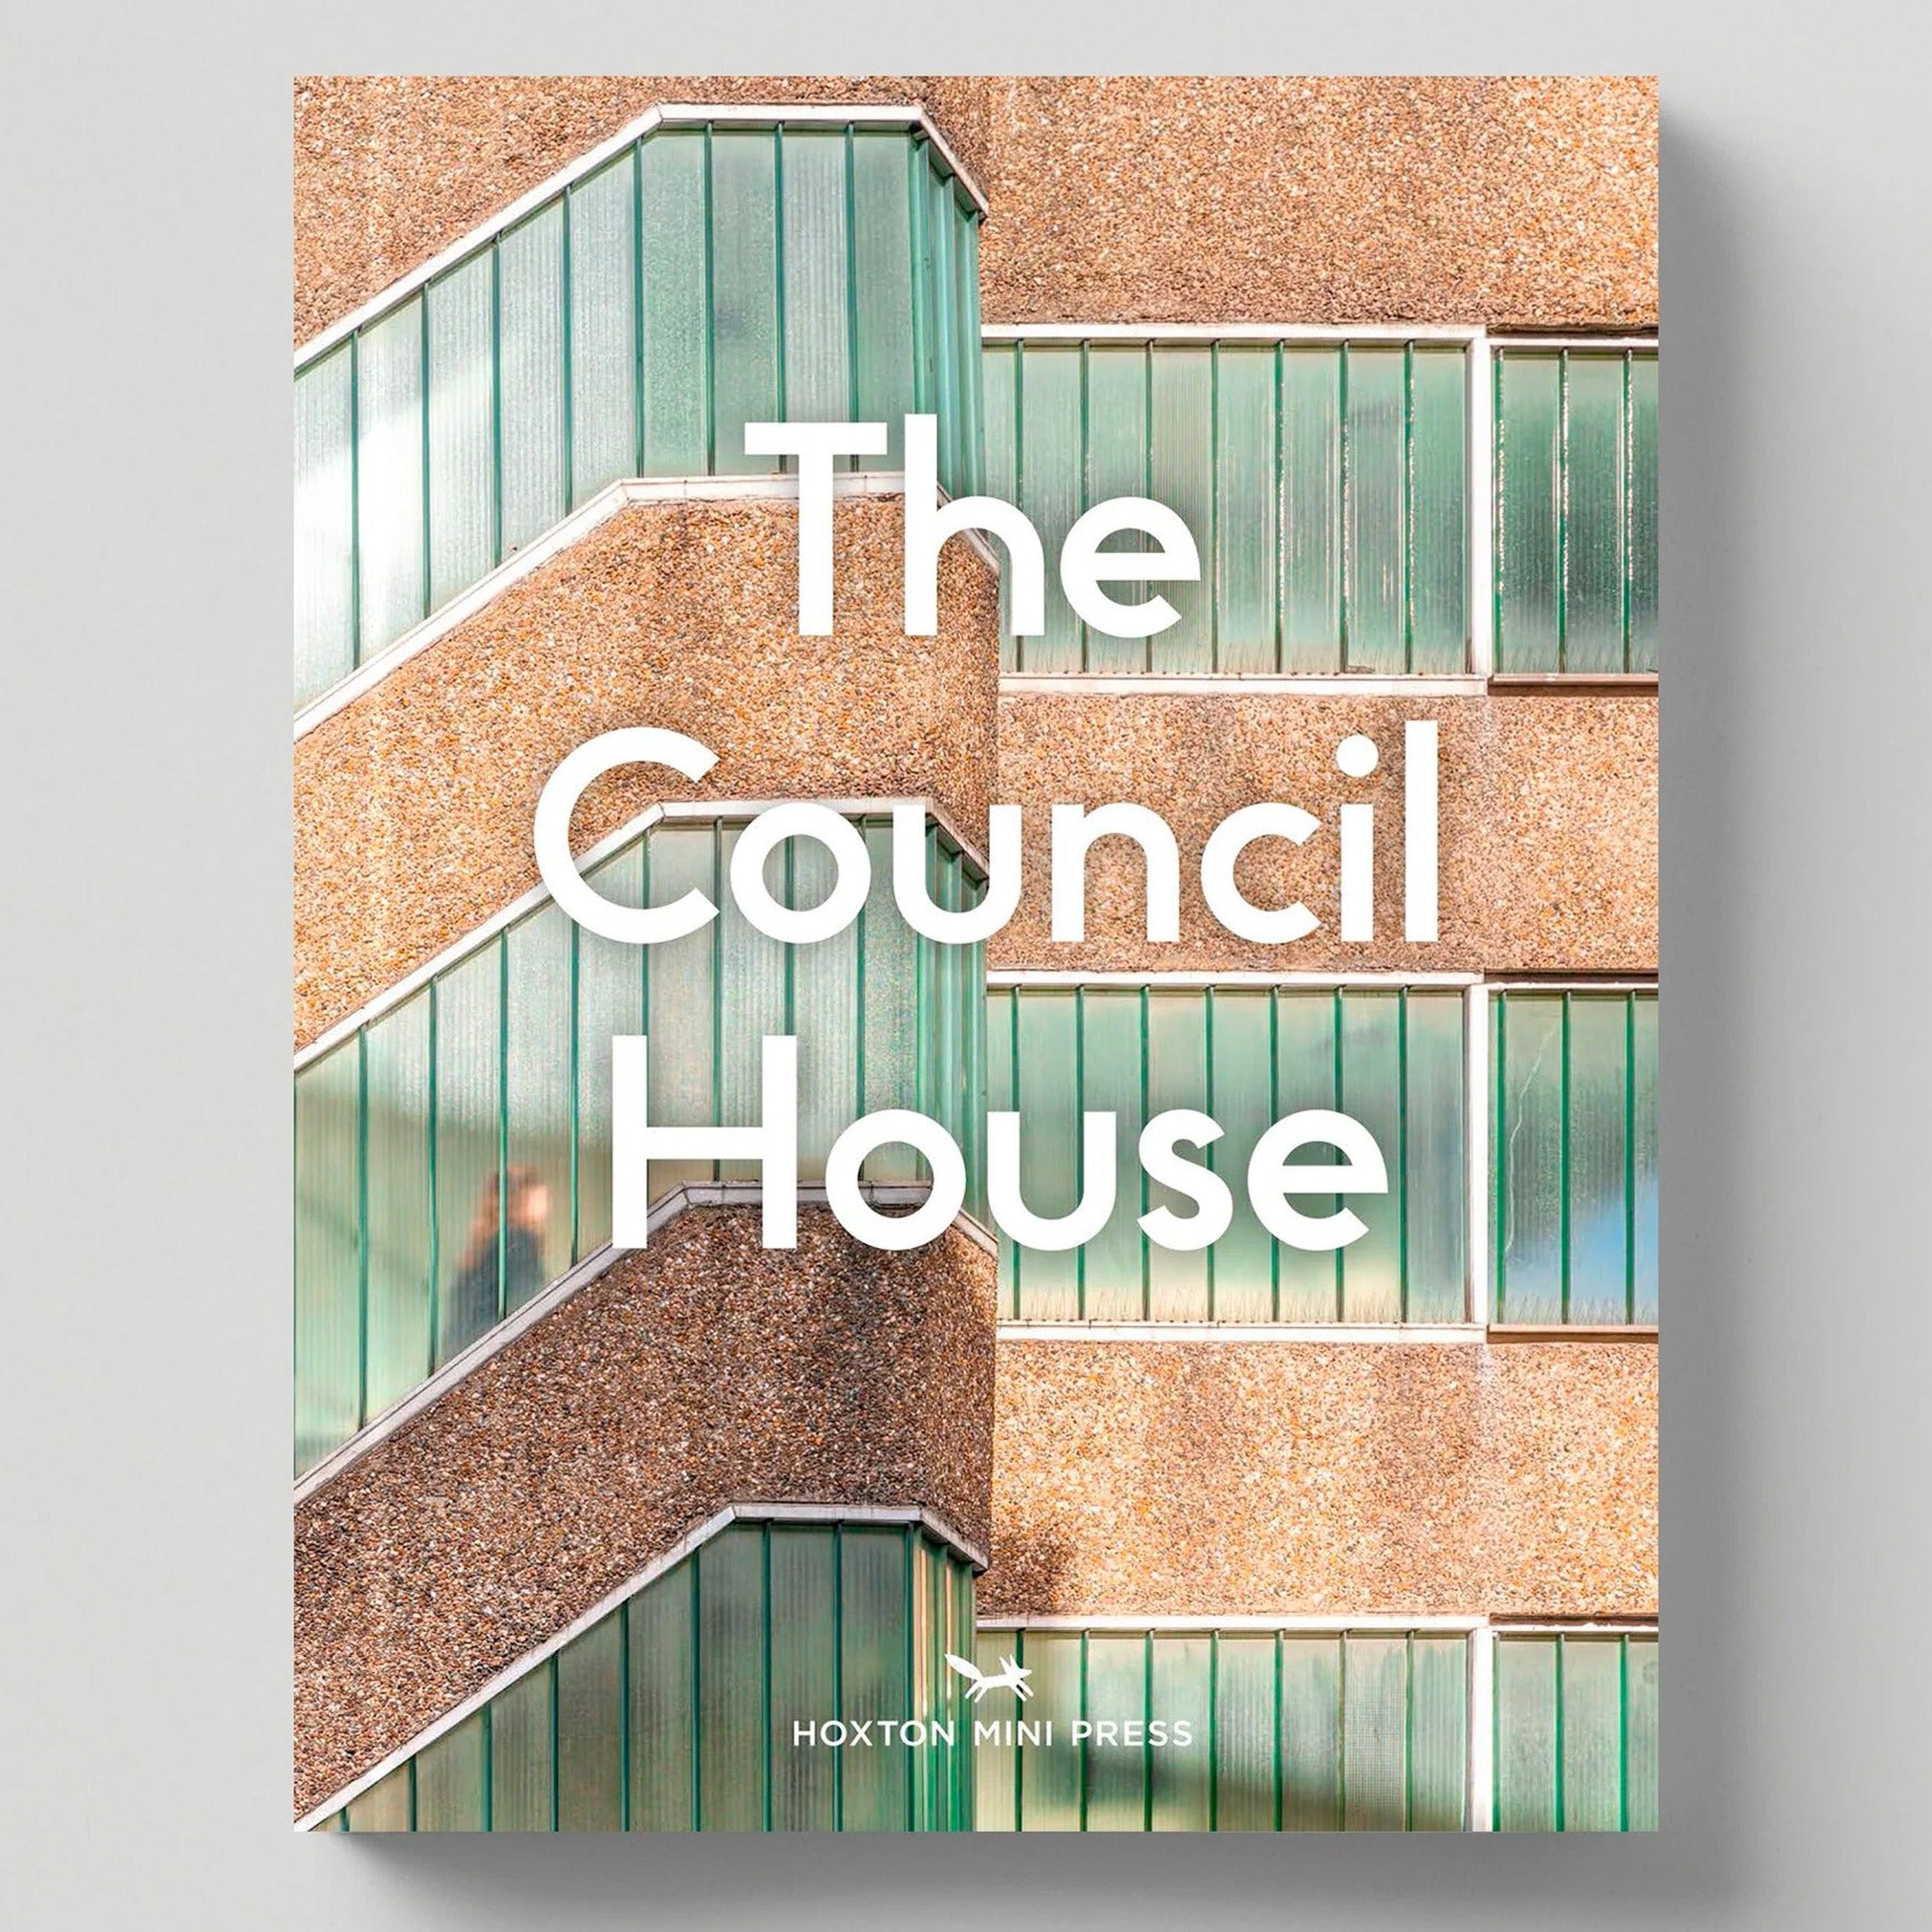 The Council House by Hoxton Mini Press